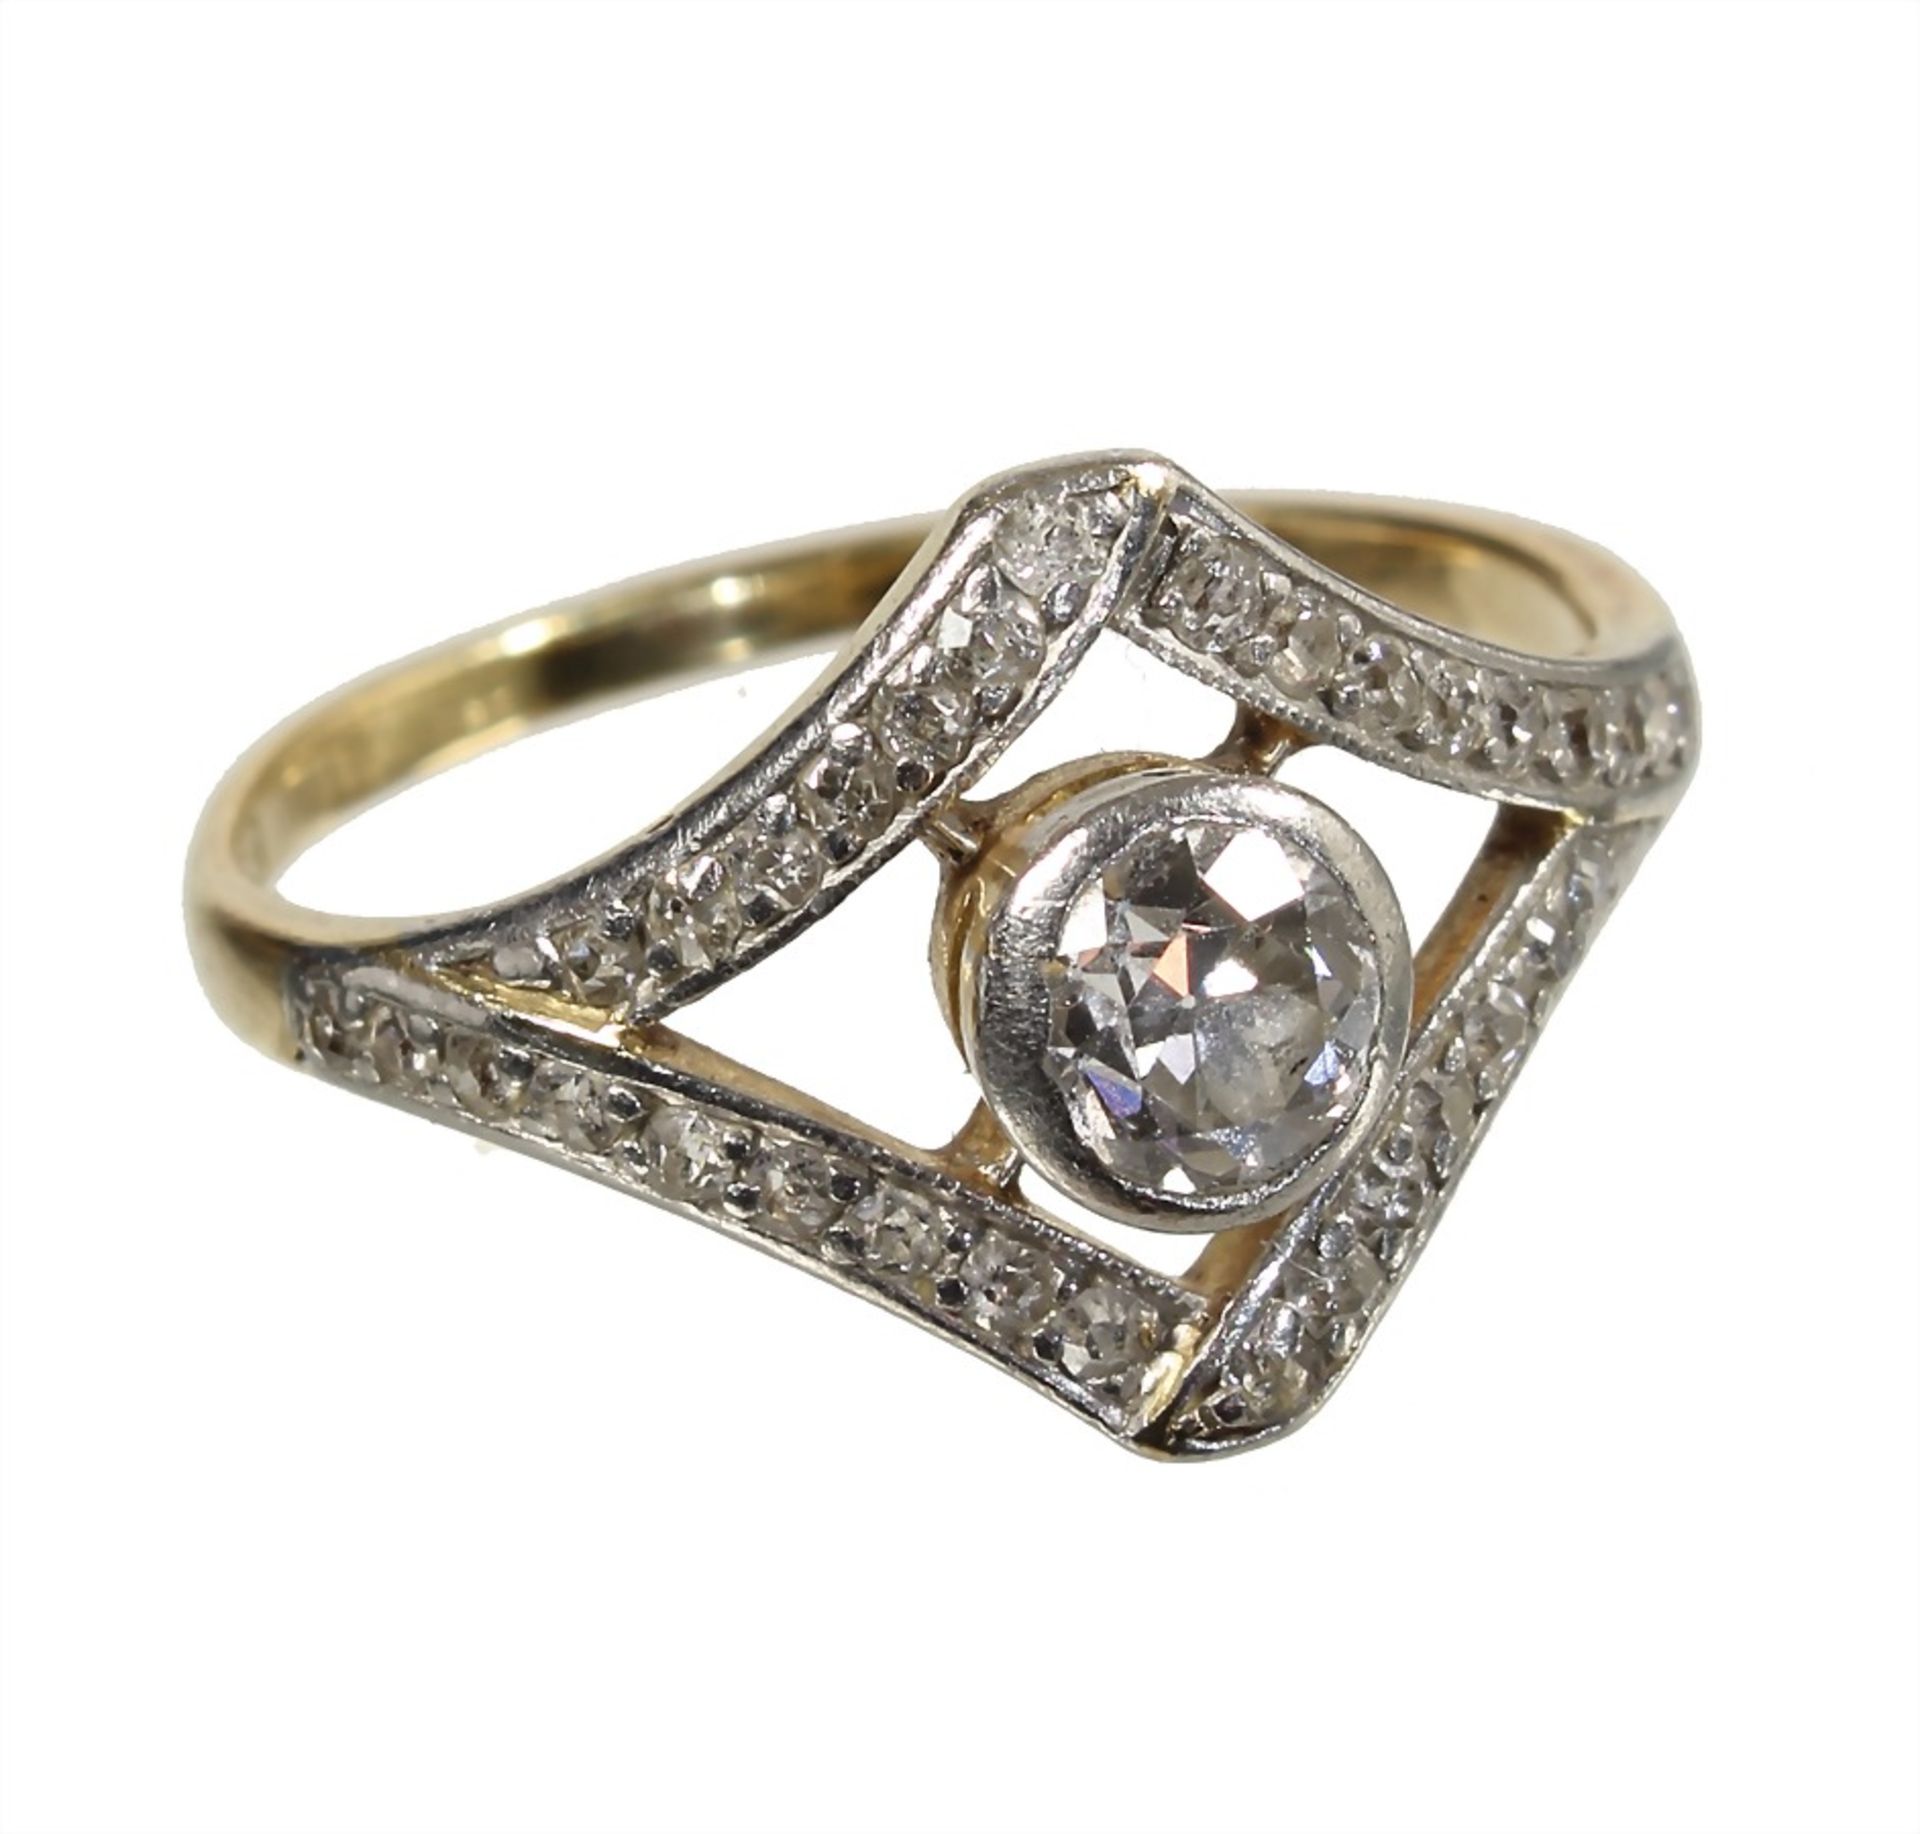 ring, "ART-DECO" 1920s/'30s, yelow gold 750/000, central old cut diamond c. 0.42 ct white, in the